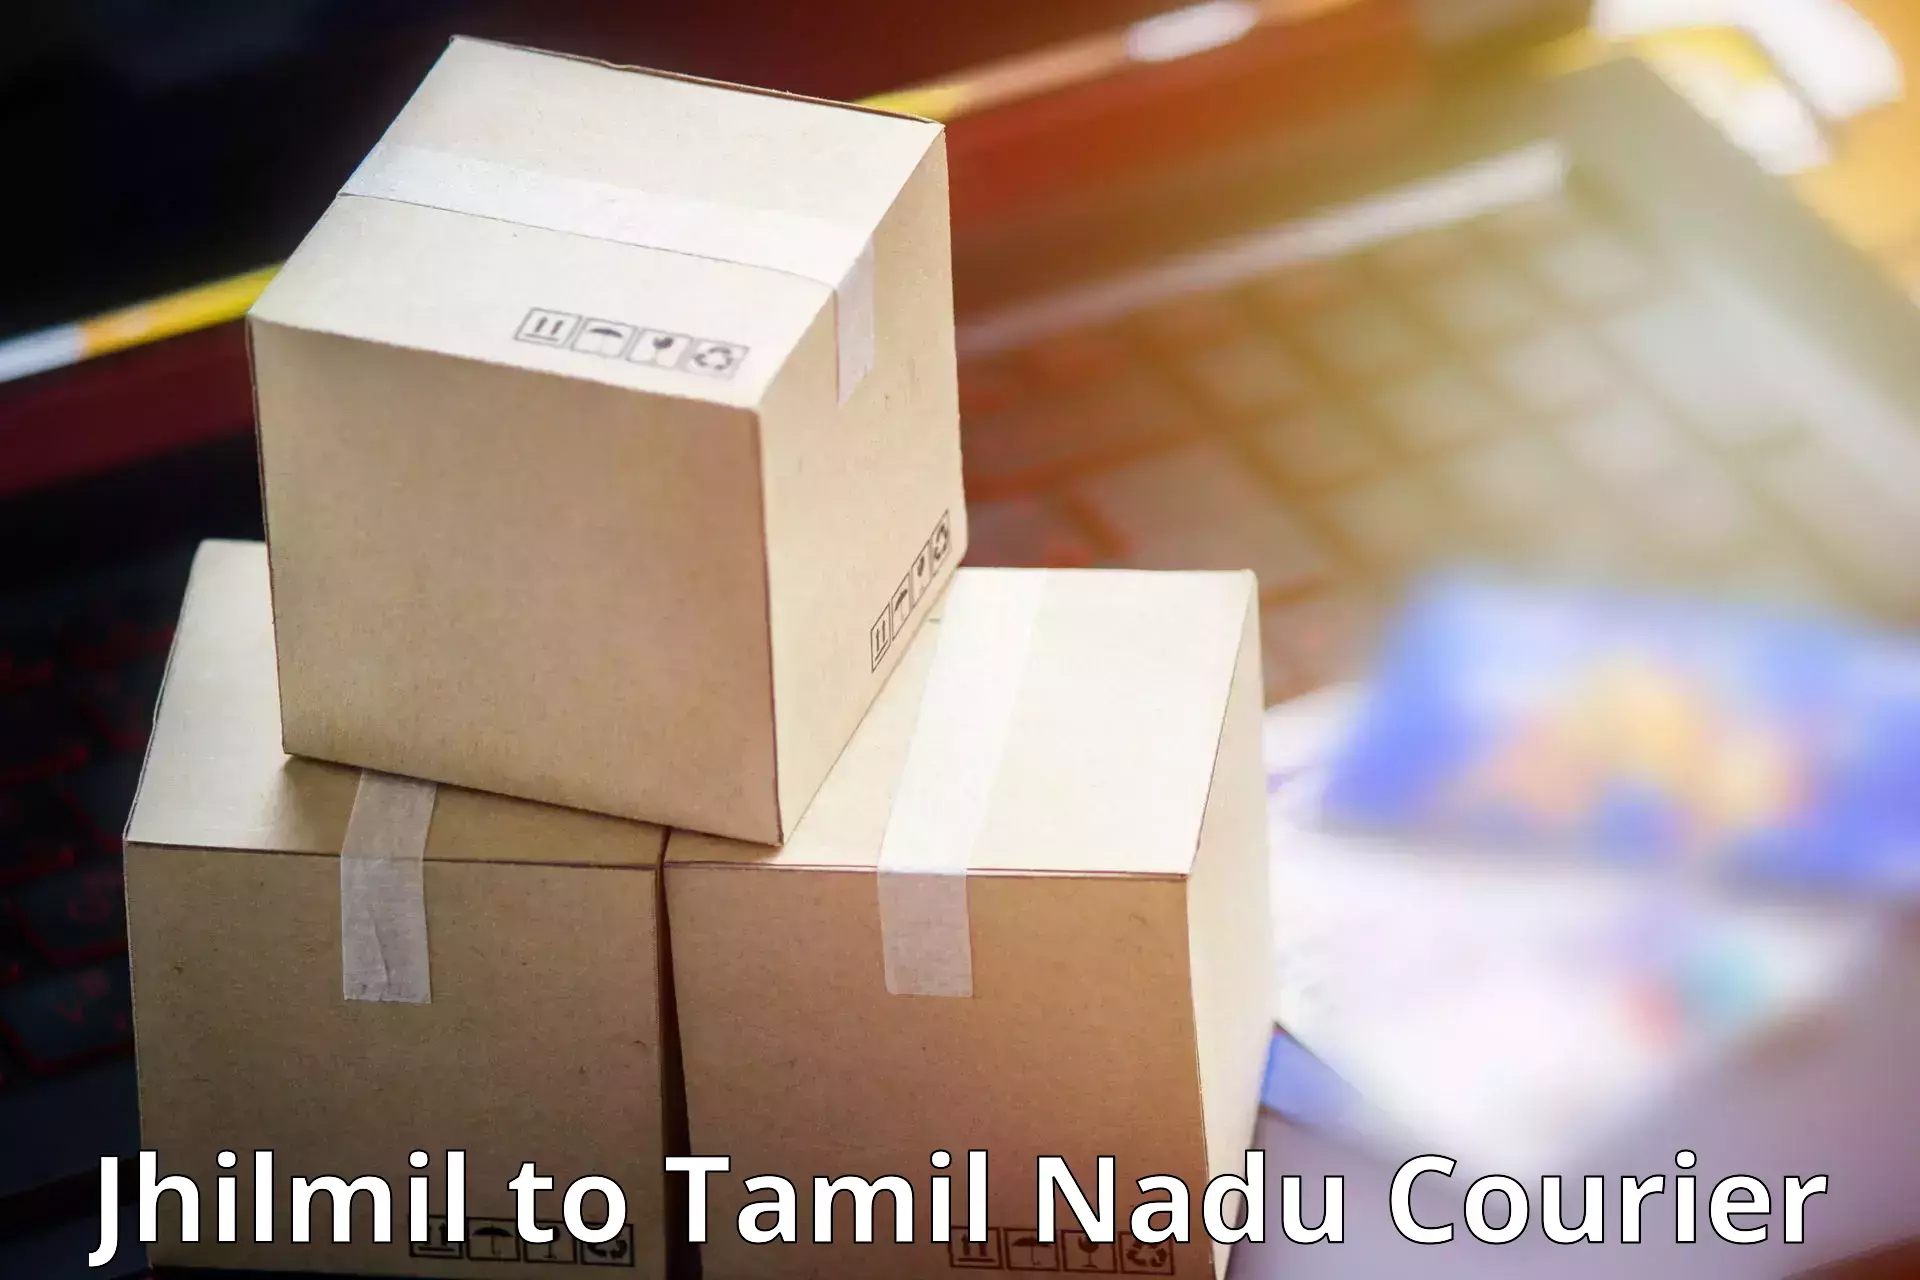 Global courier networks Jhilmil to Ennore Port Chennai